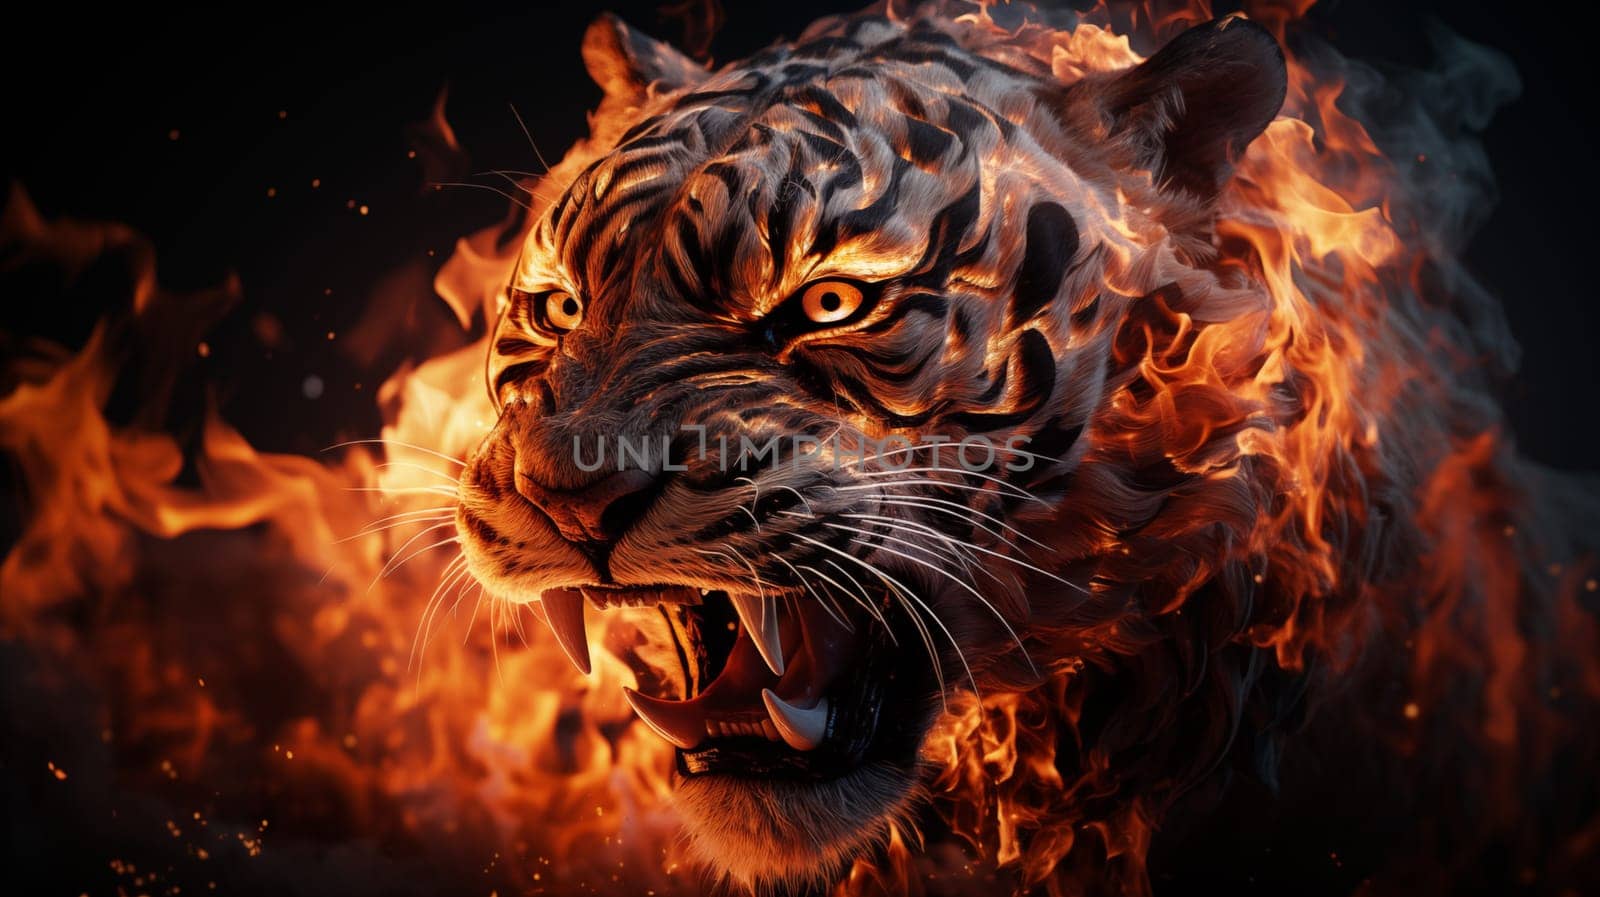 Head of an angry, fiery tiger, with open mouth and burning eyes, on a black background by Zakharova